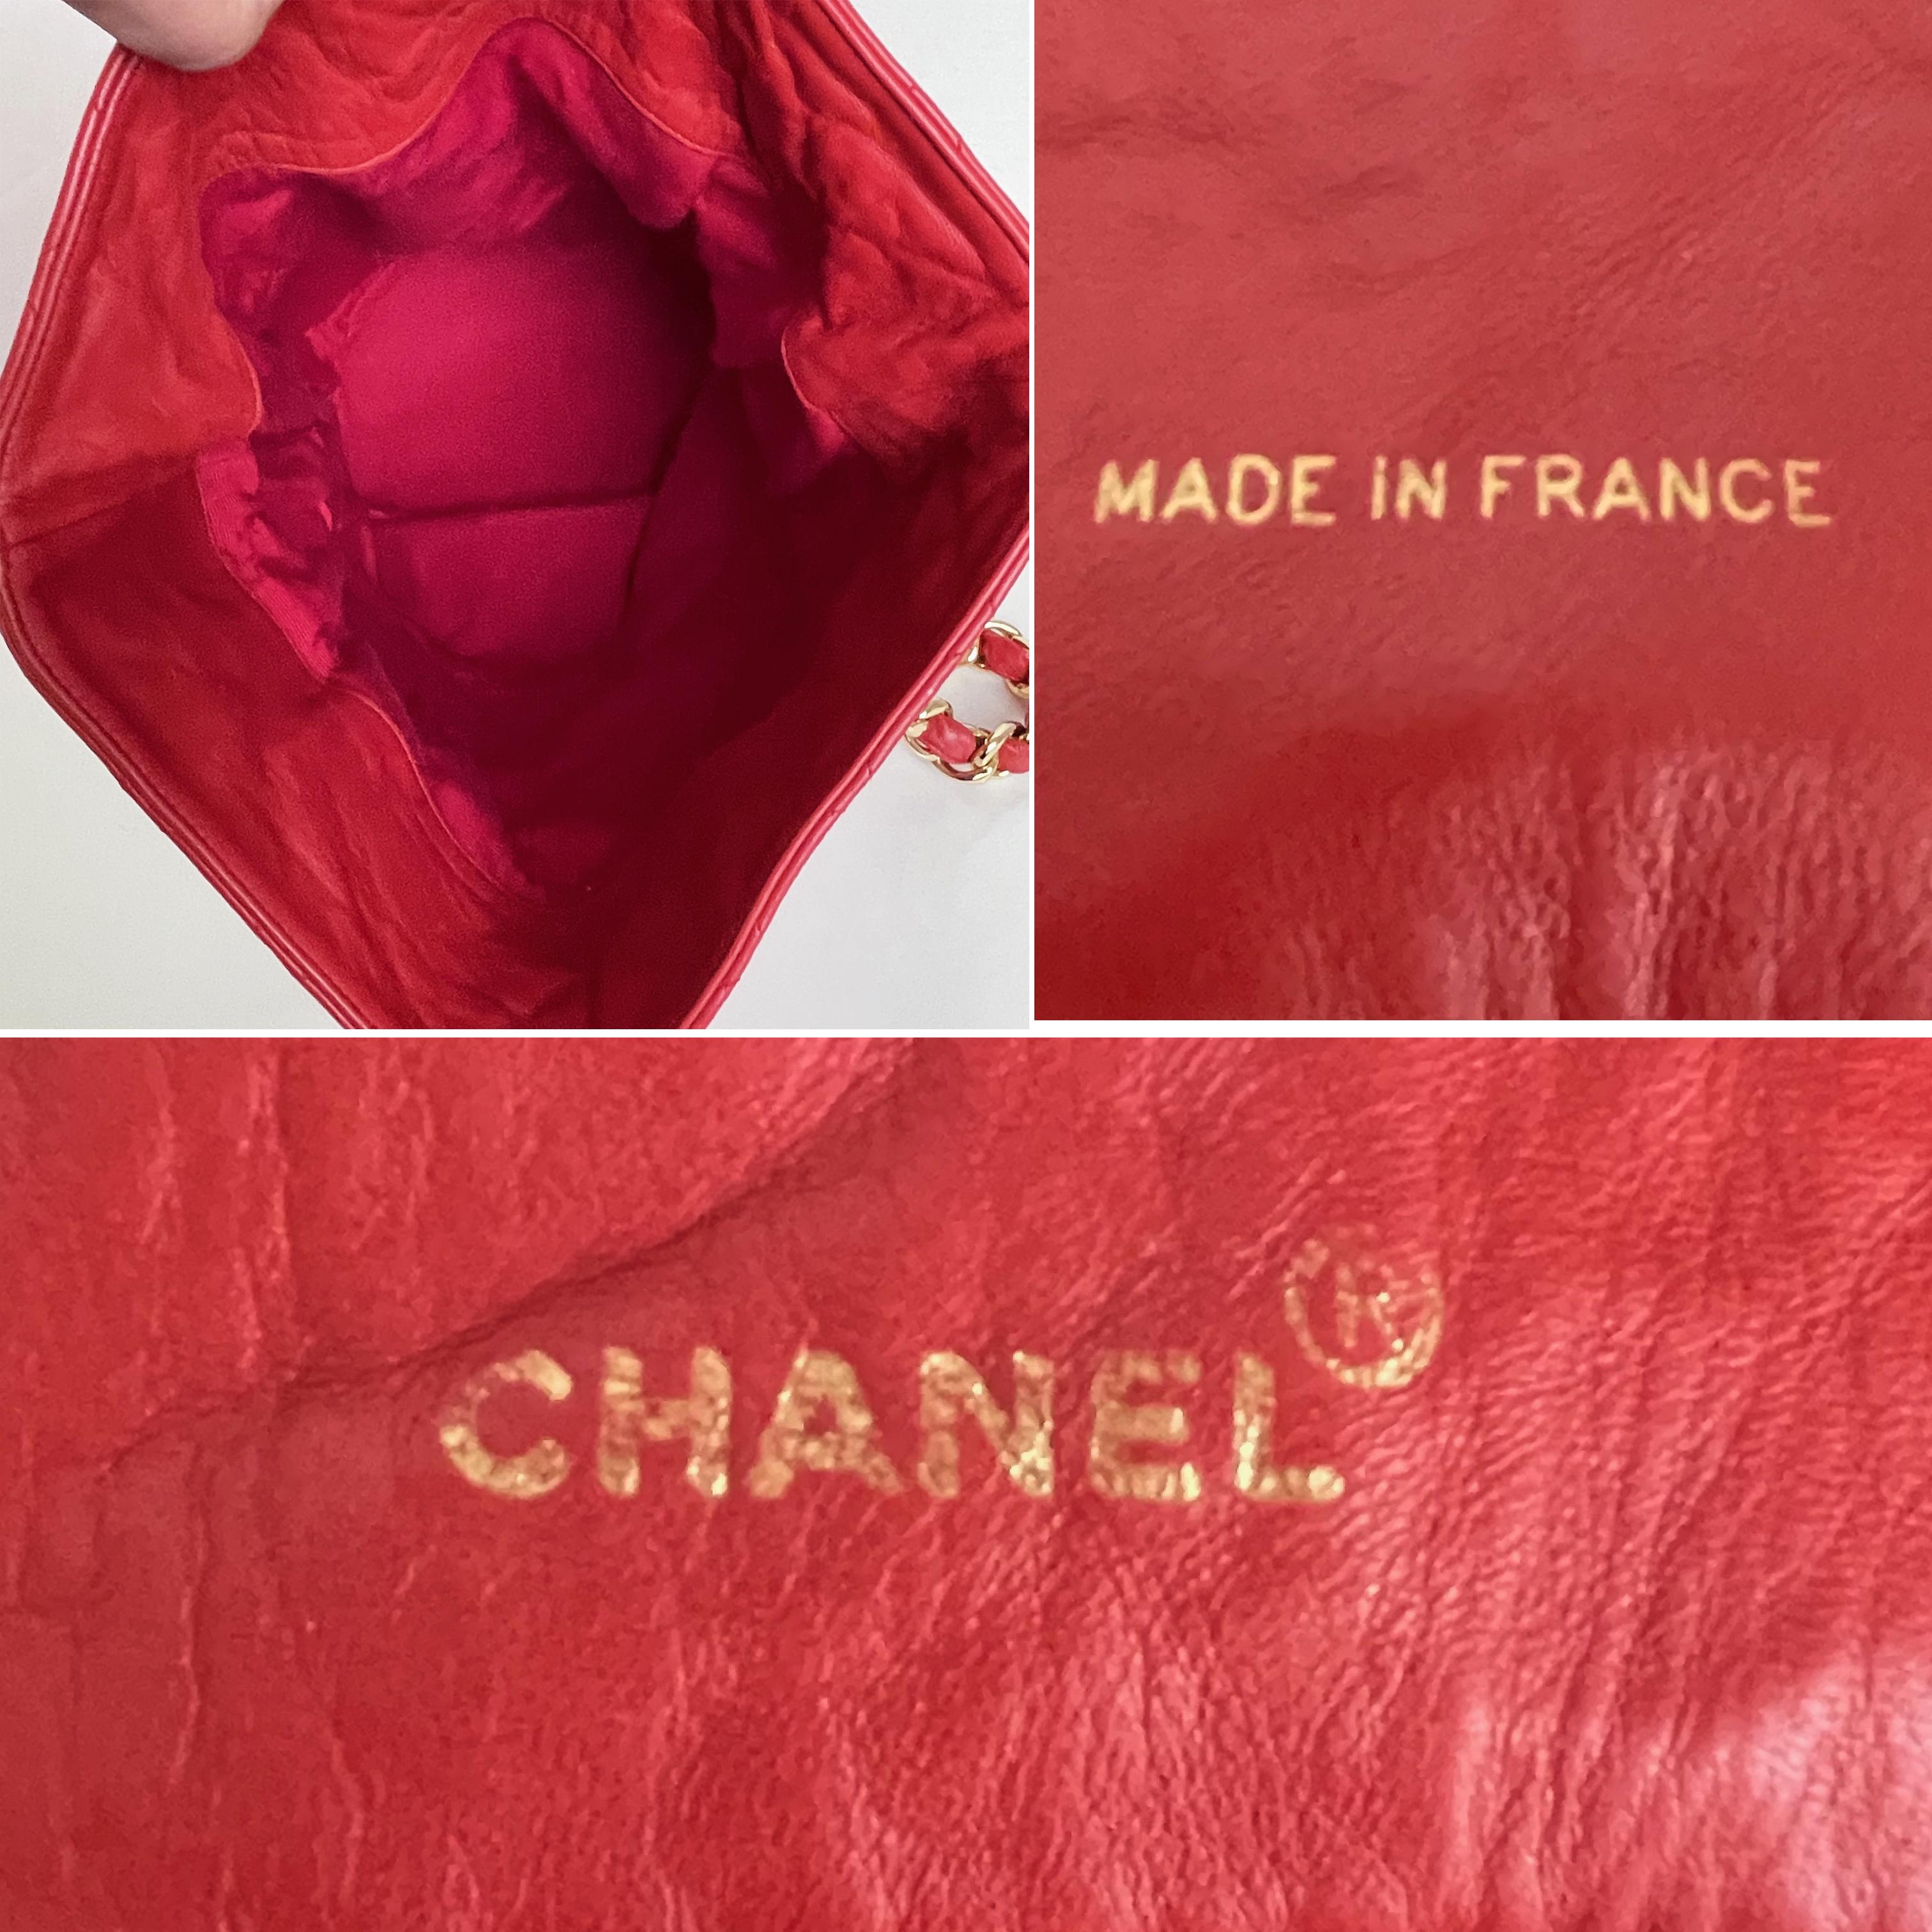 Vintage Chanel Buckle Bag Red Matelasse Leather with Chain Strap F/W 1992 Rare 9